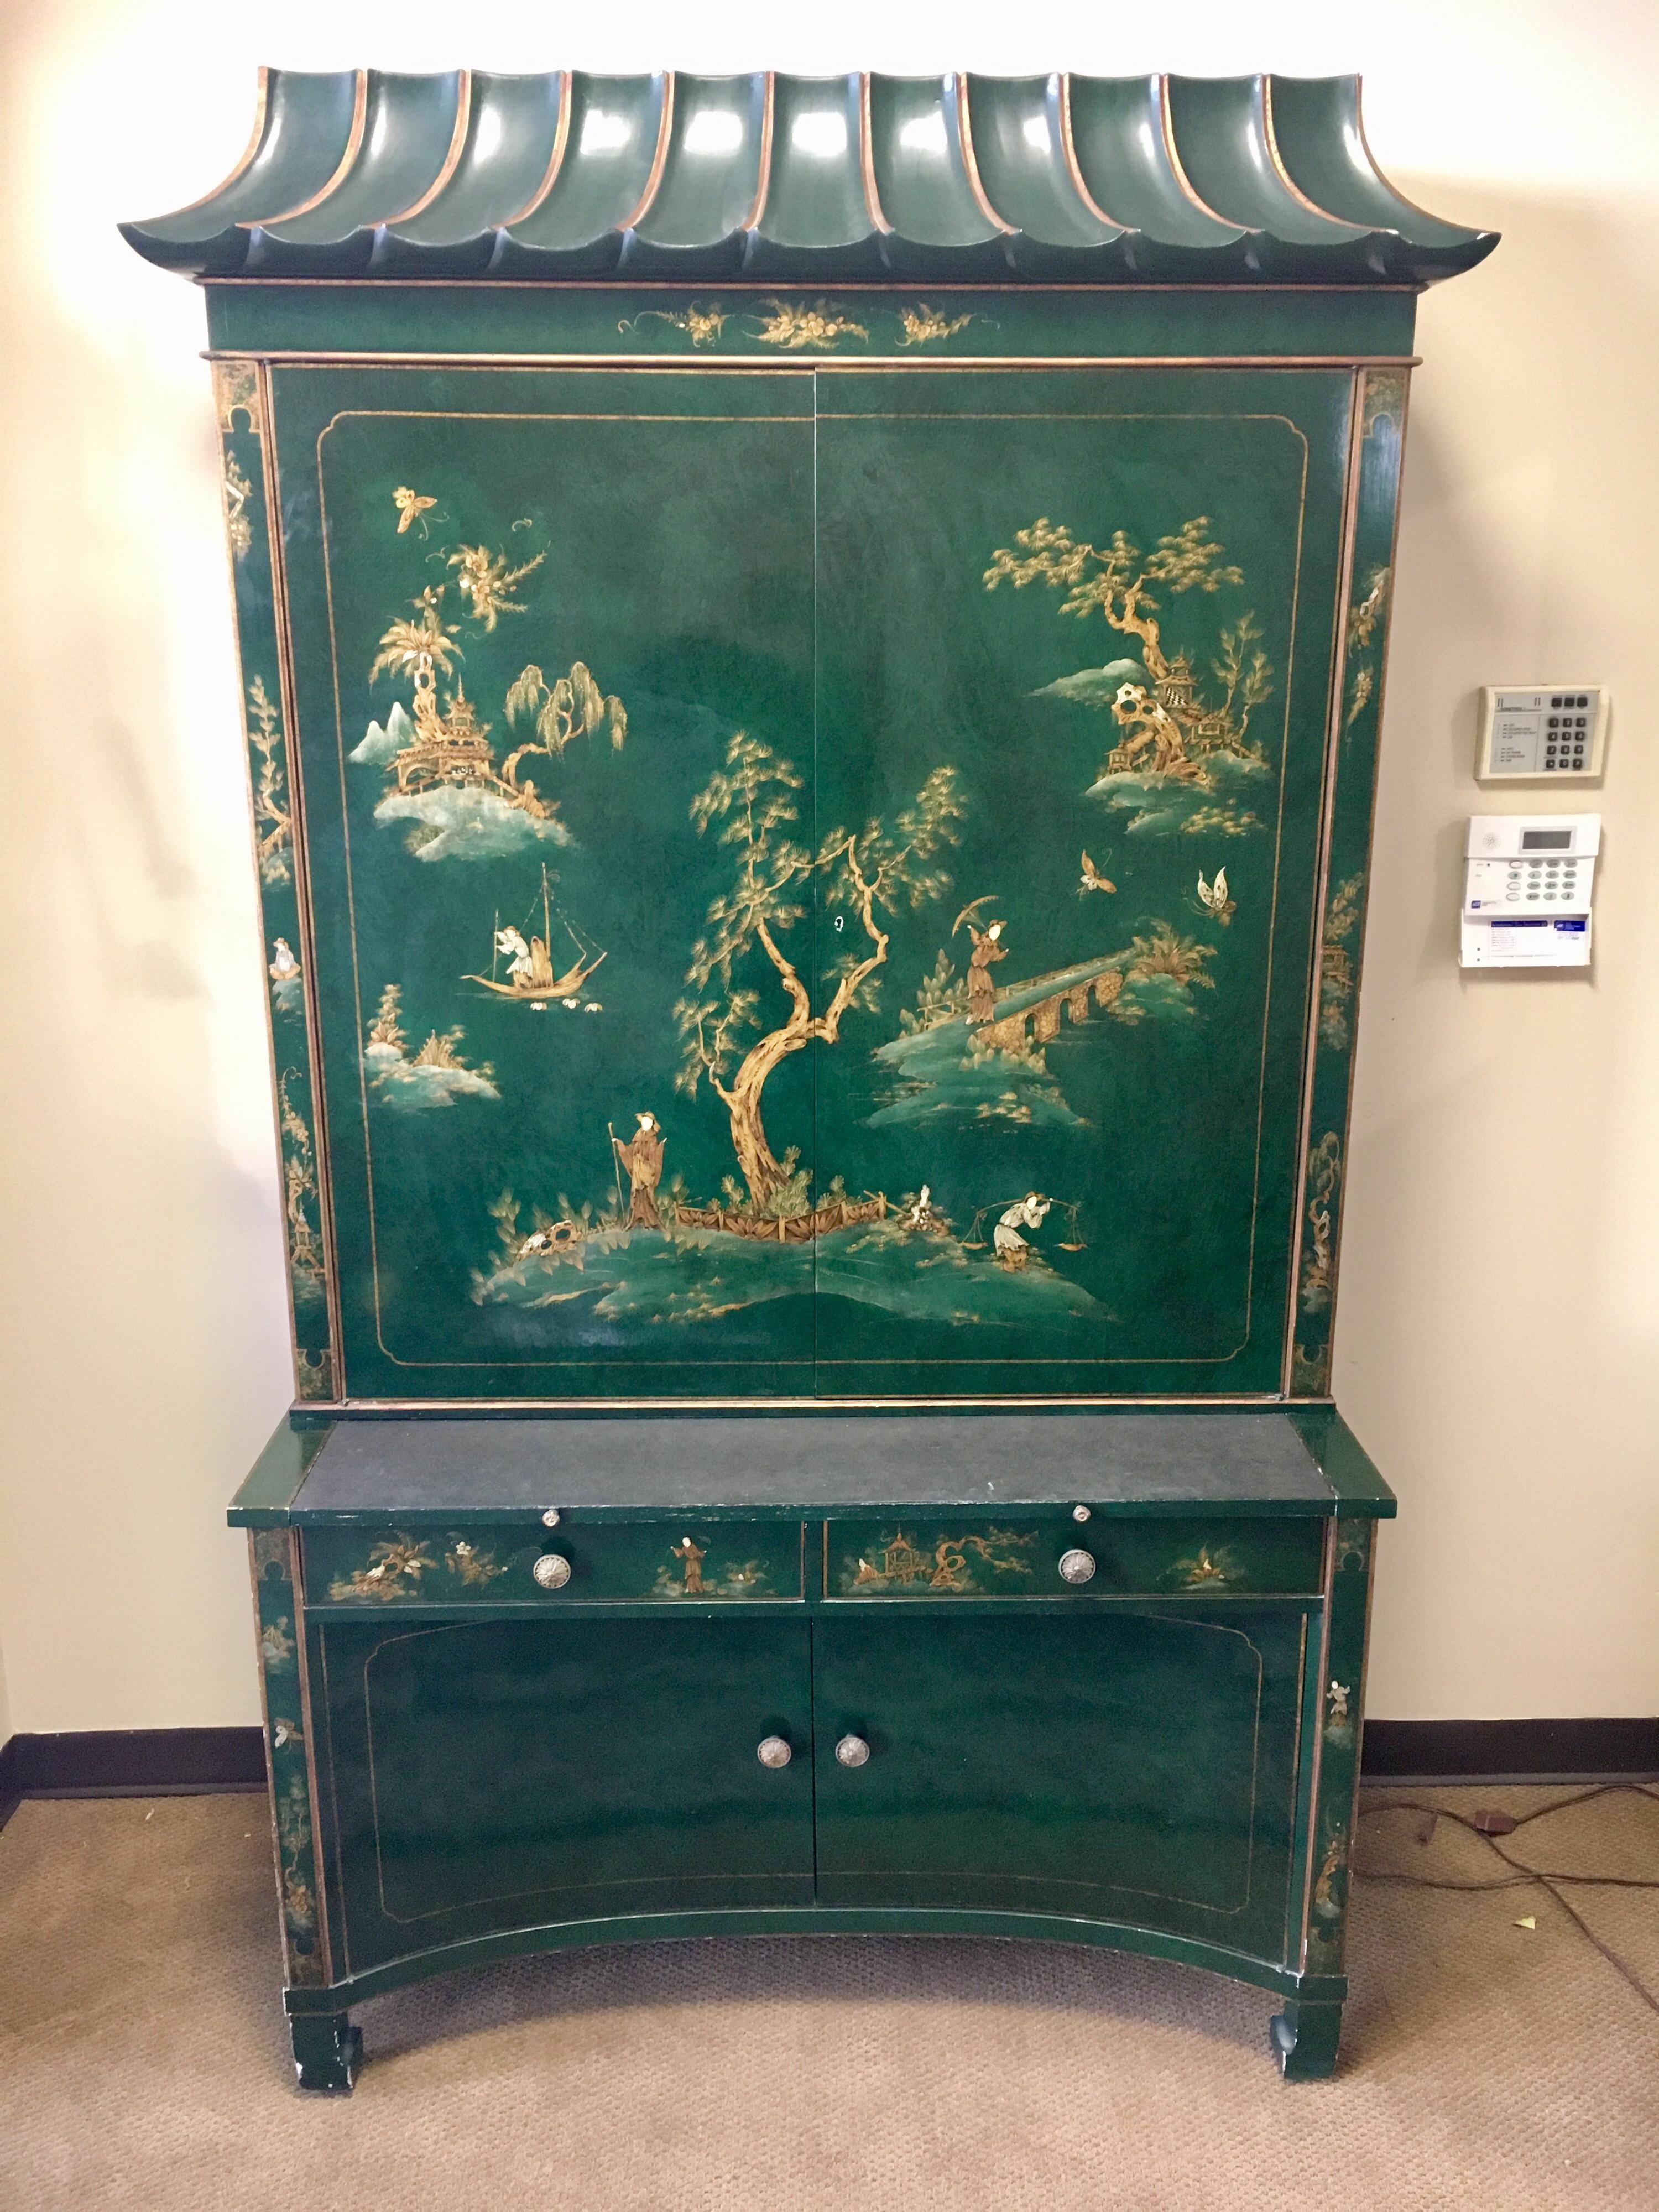 Magnificent emerald green lacquer Chinoiserie secretary two part desk features a pagoda top and hand painted gold figural scenes on an Asian landscape. Top section has two doors that open to glass shelves  and can be illuminated from above when